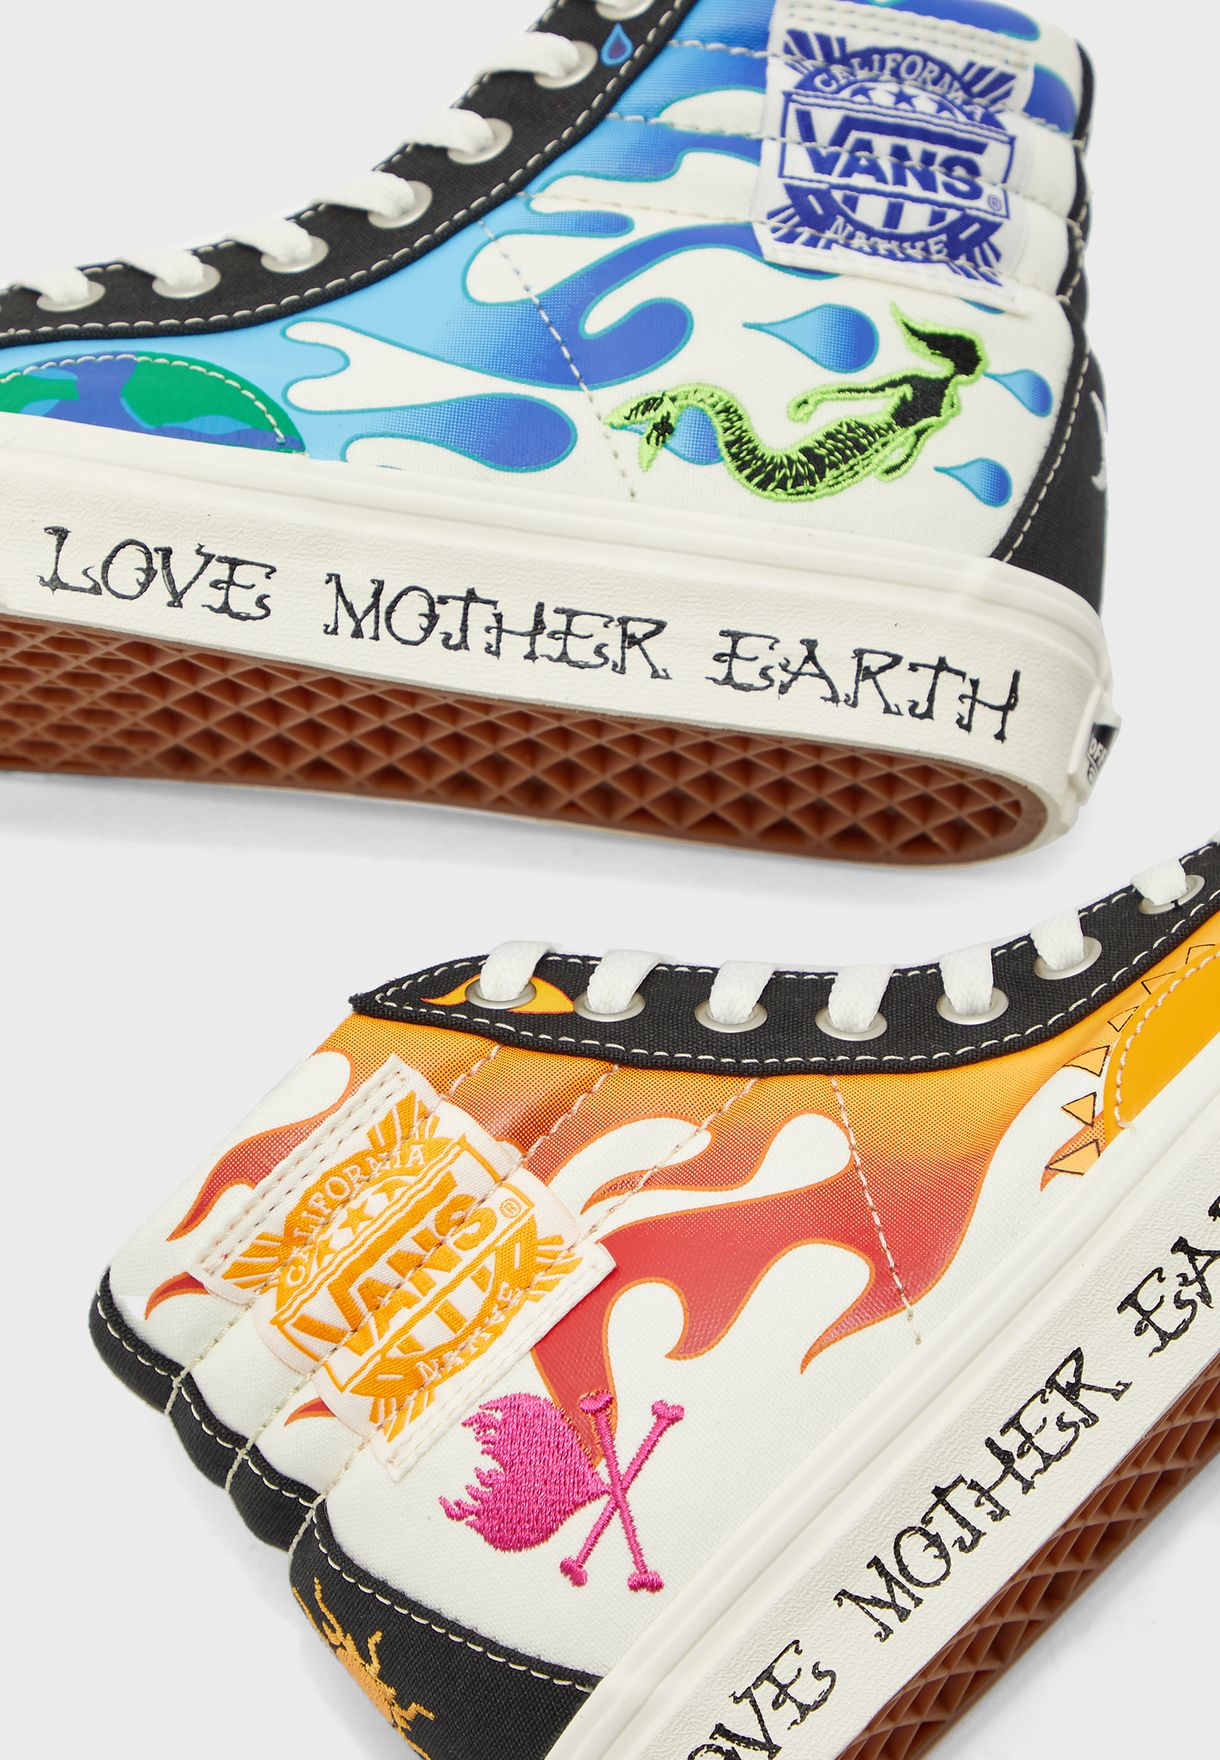 mother earth shoes